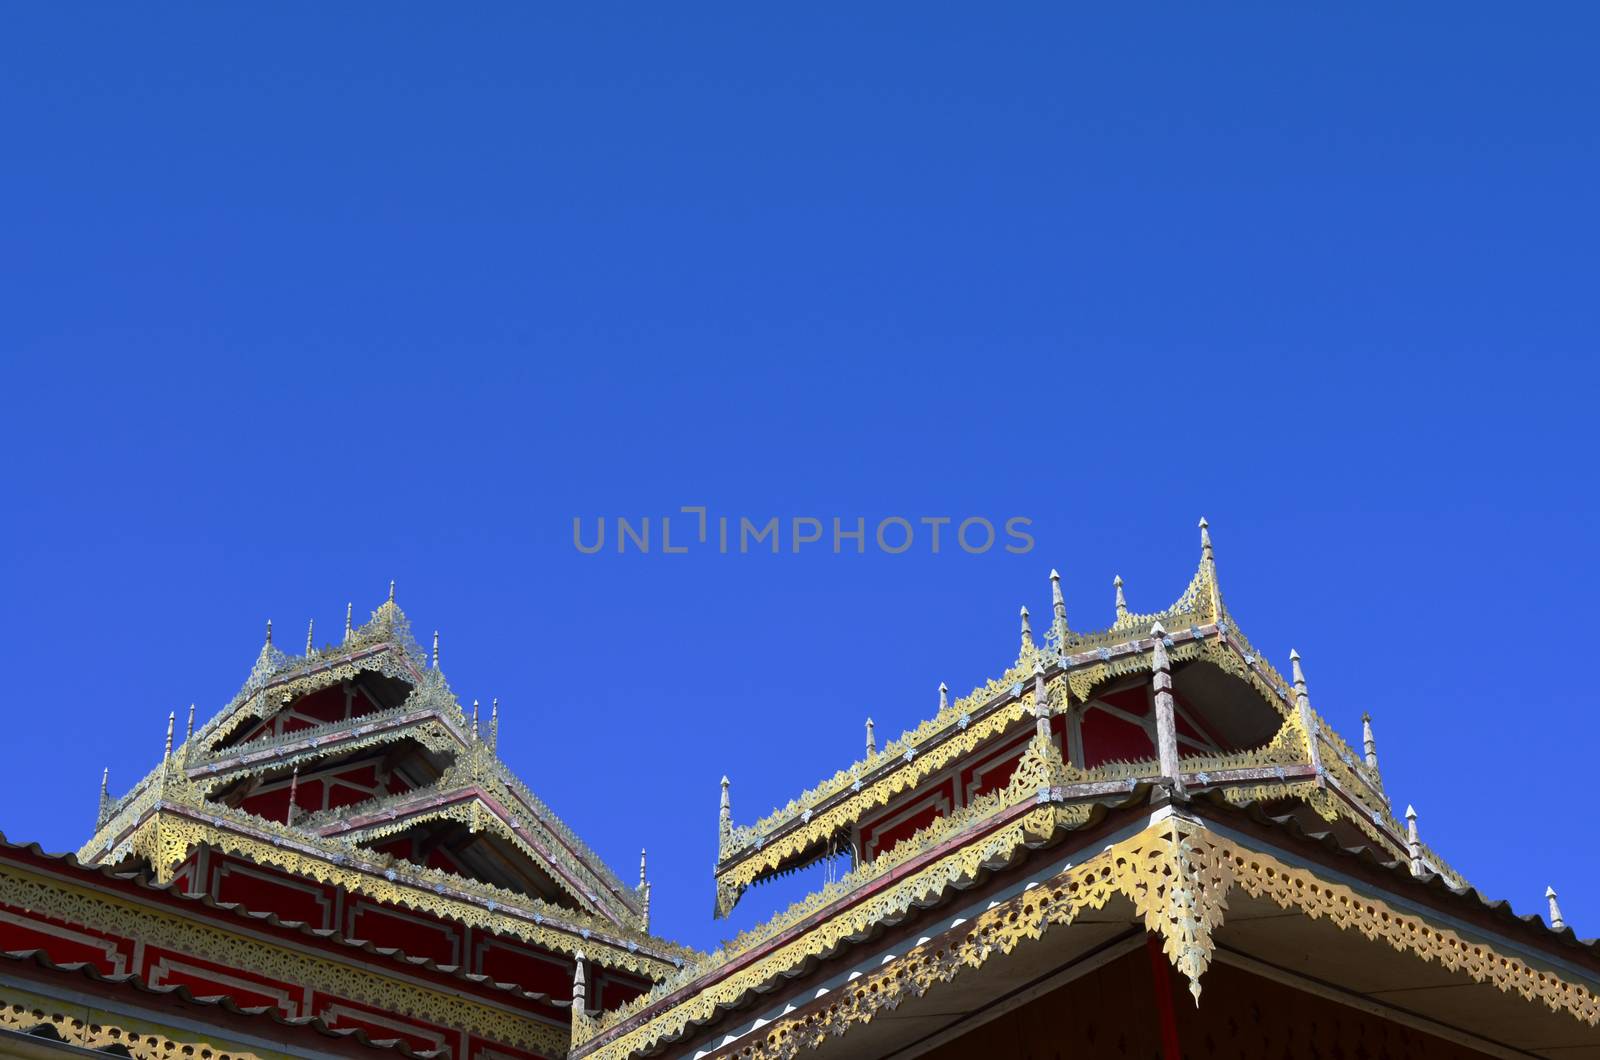 Architecture of Roof of Buddhist Temple by kobfujar